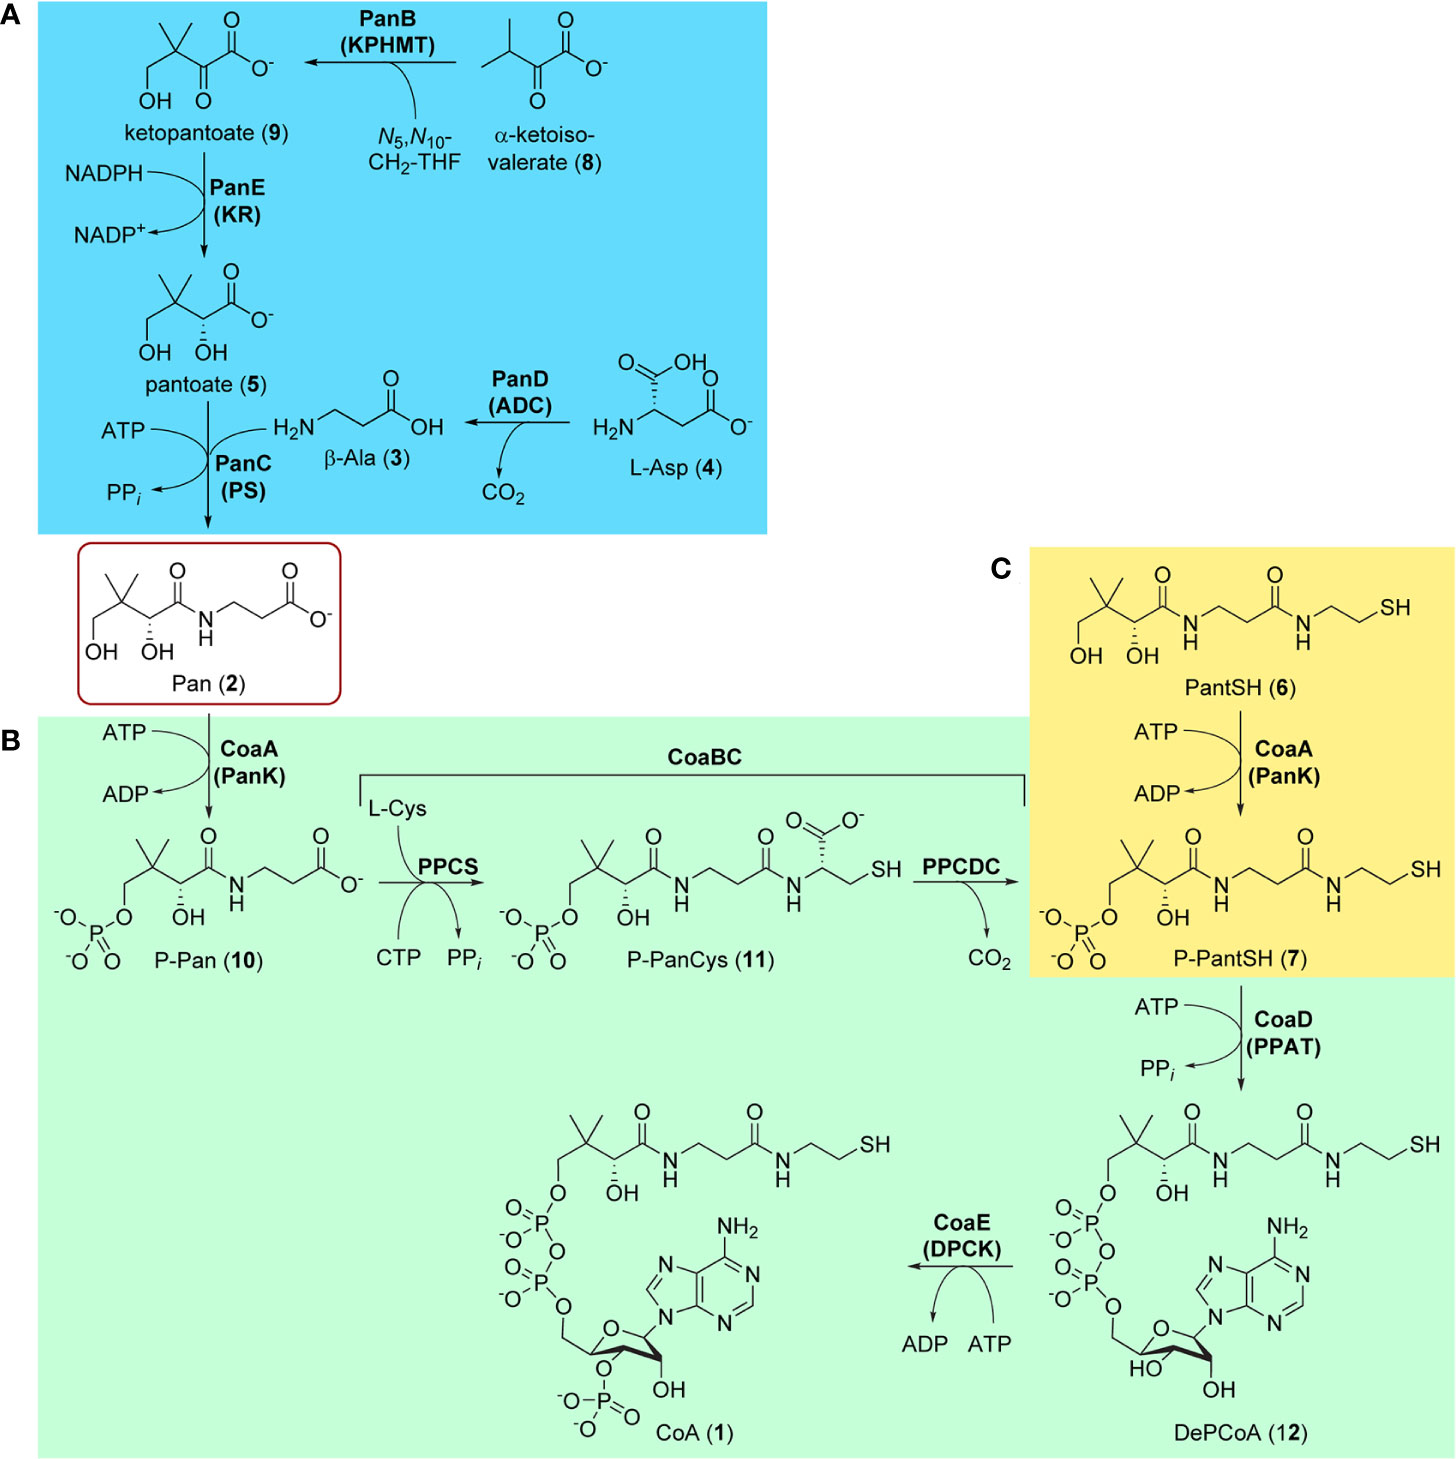 Frontiers Vitamin In The Crosshairs Targeting Pantothenate And Coenzyme A Biosynthesis For New Antituberculosis Agents Cellular And Infection Microbiology